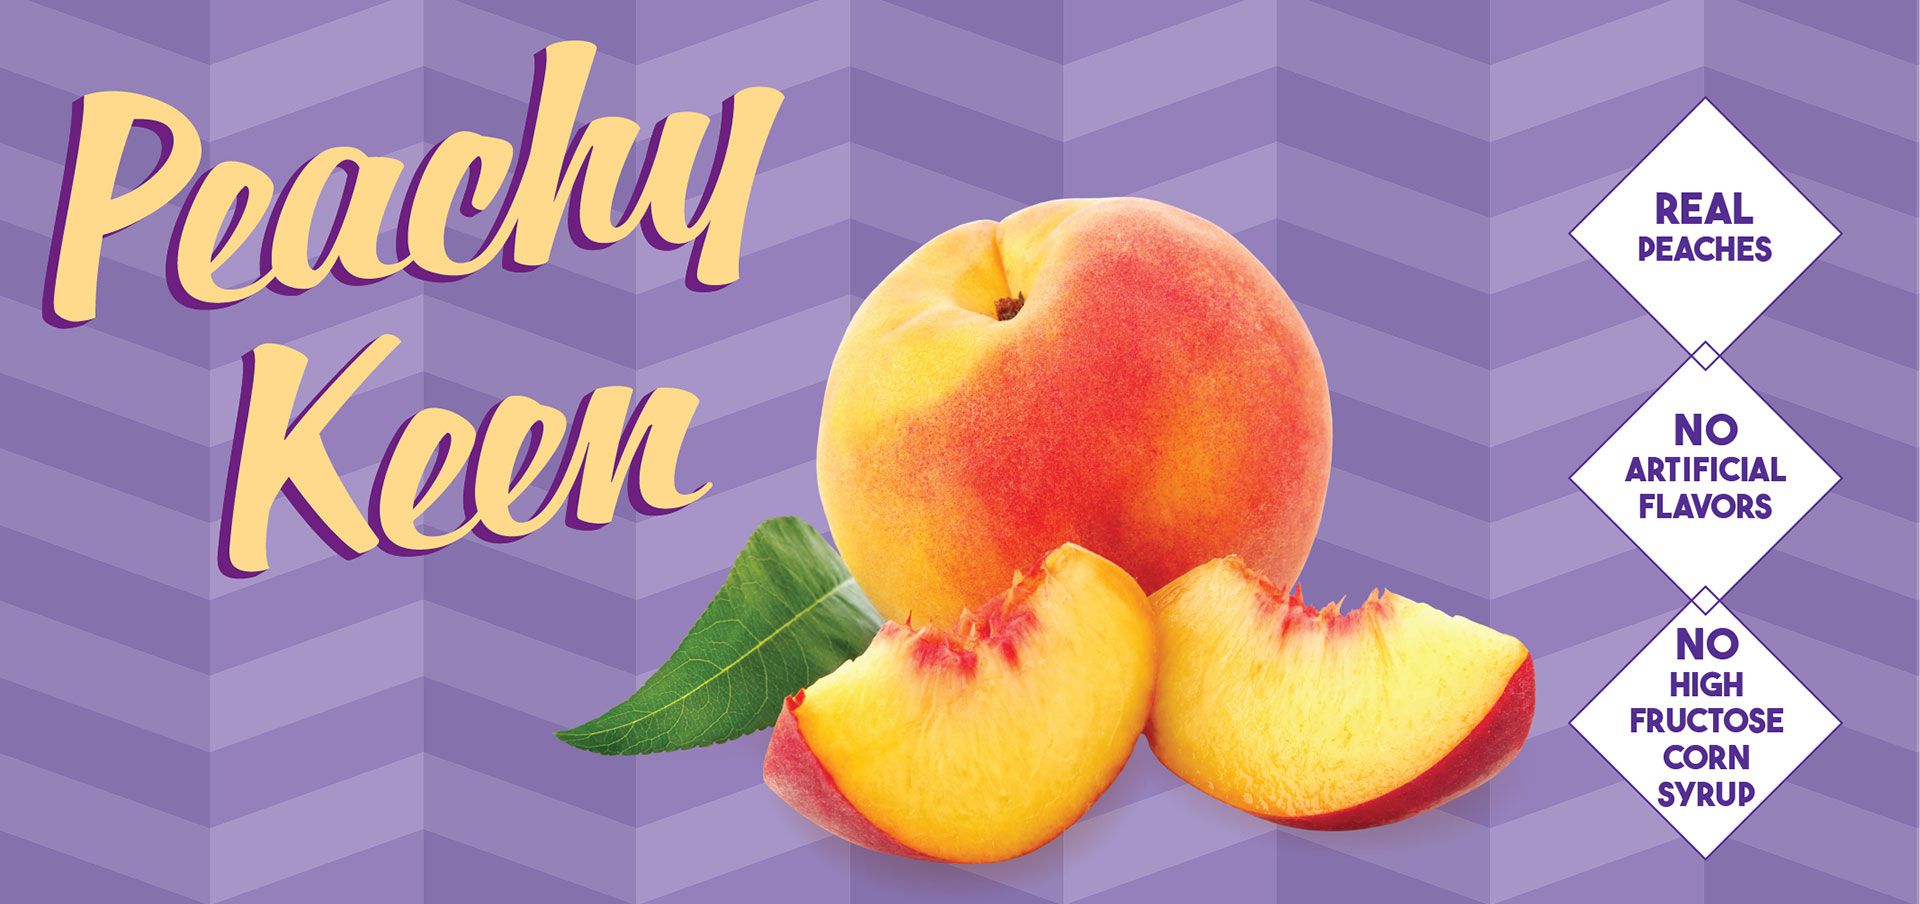 peachy keen label image